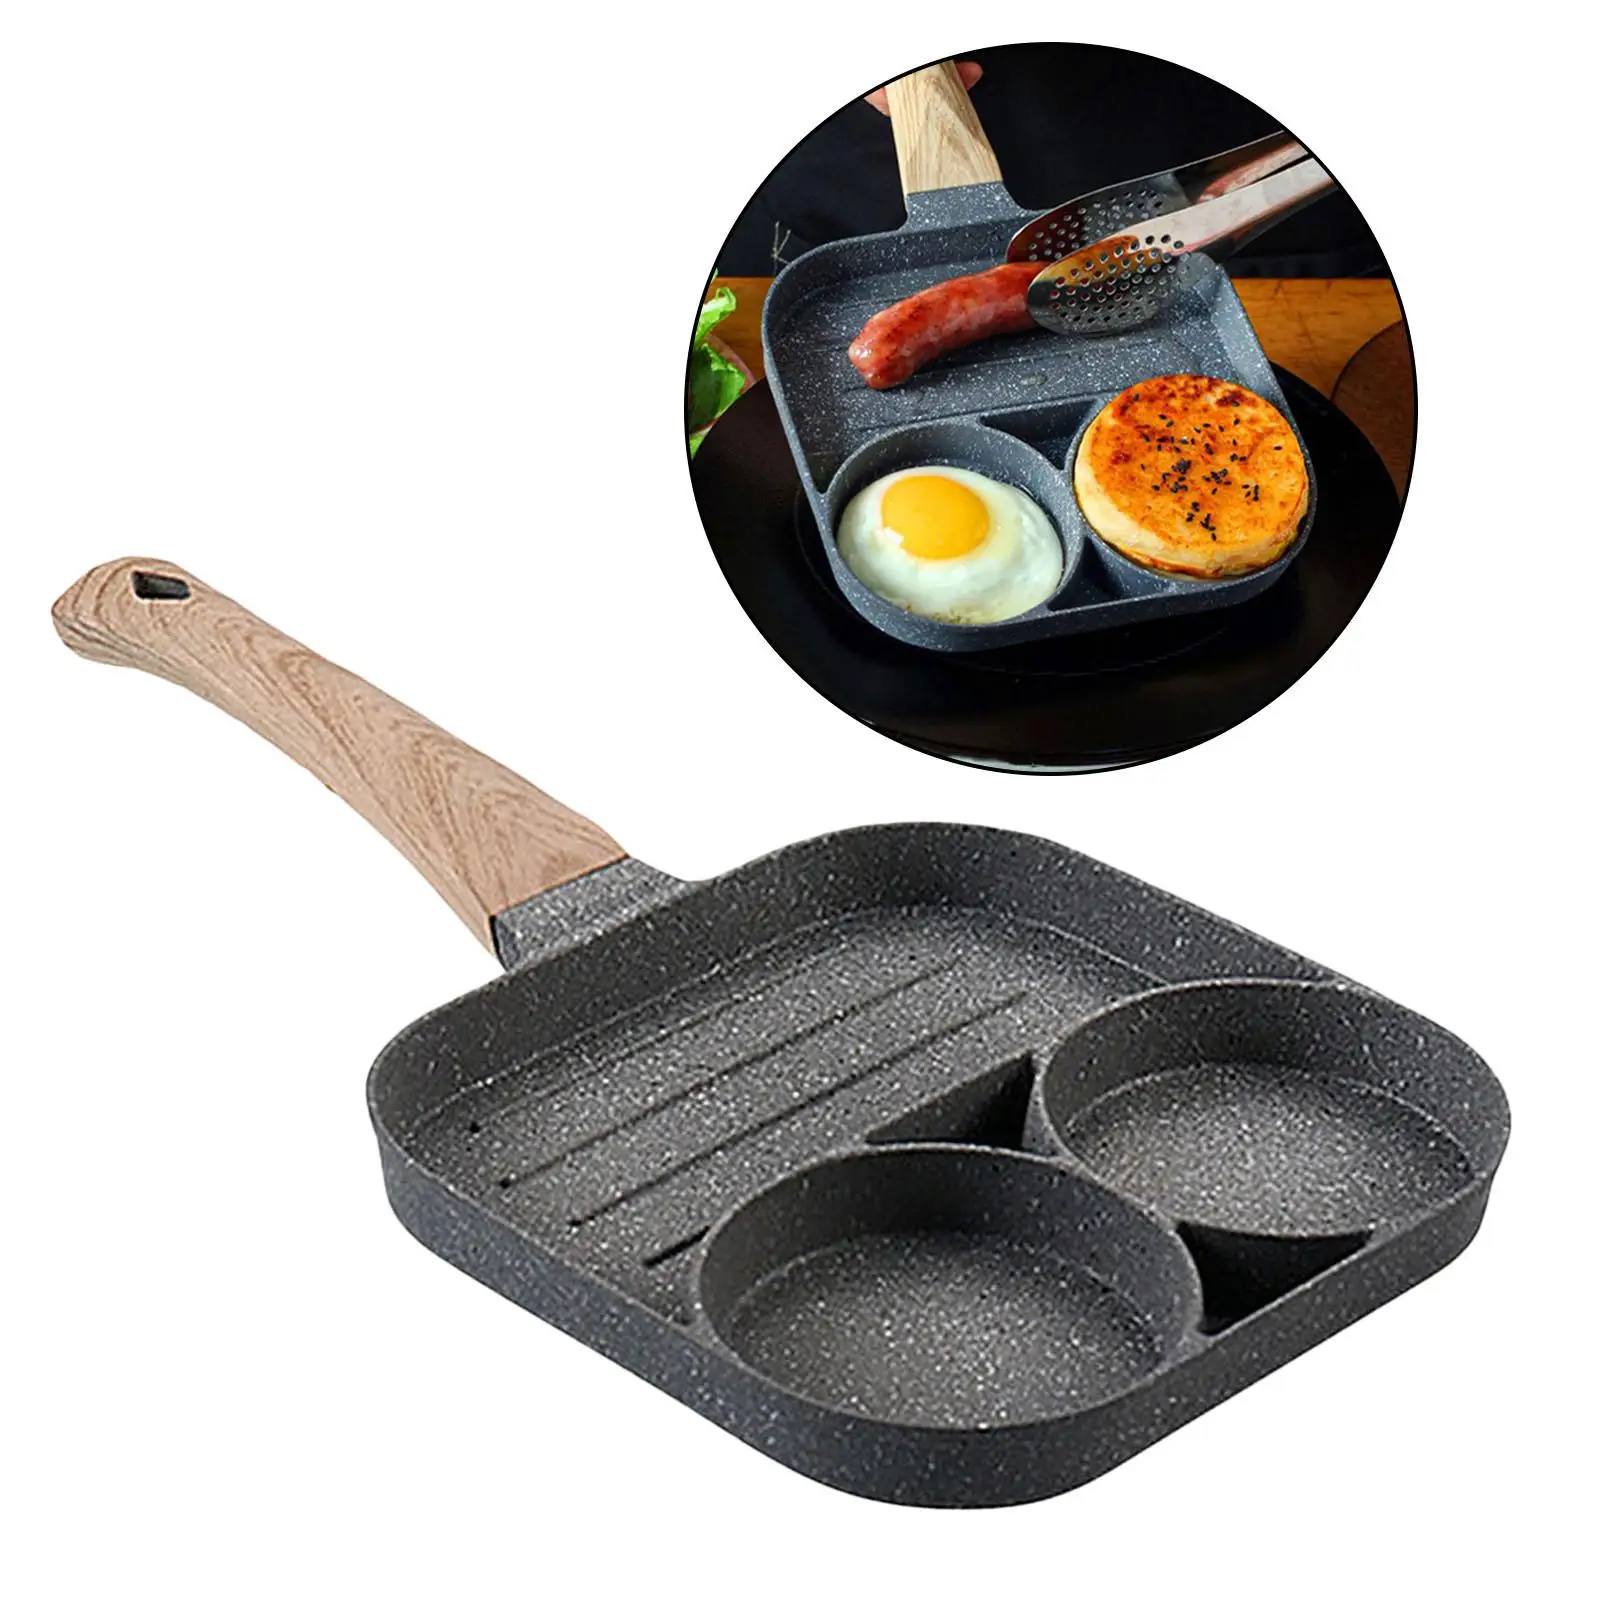 Stone Egg Frying Pan 3-Cup Steak Sausage Cooker Pan with Long Handle